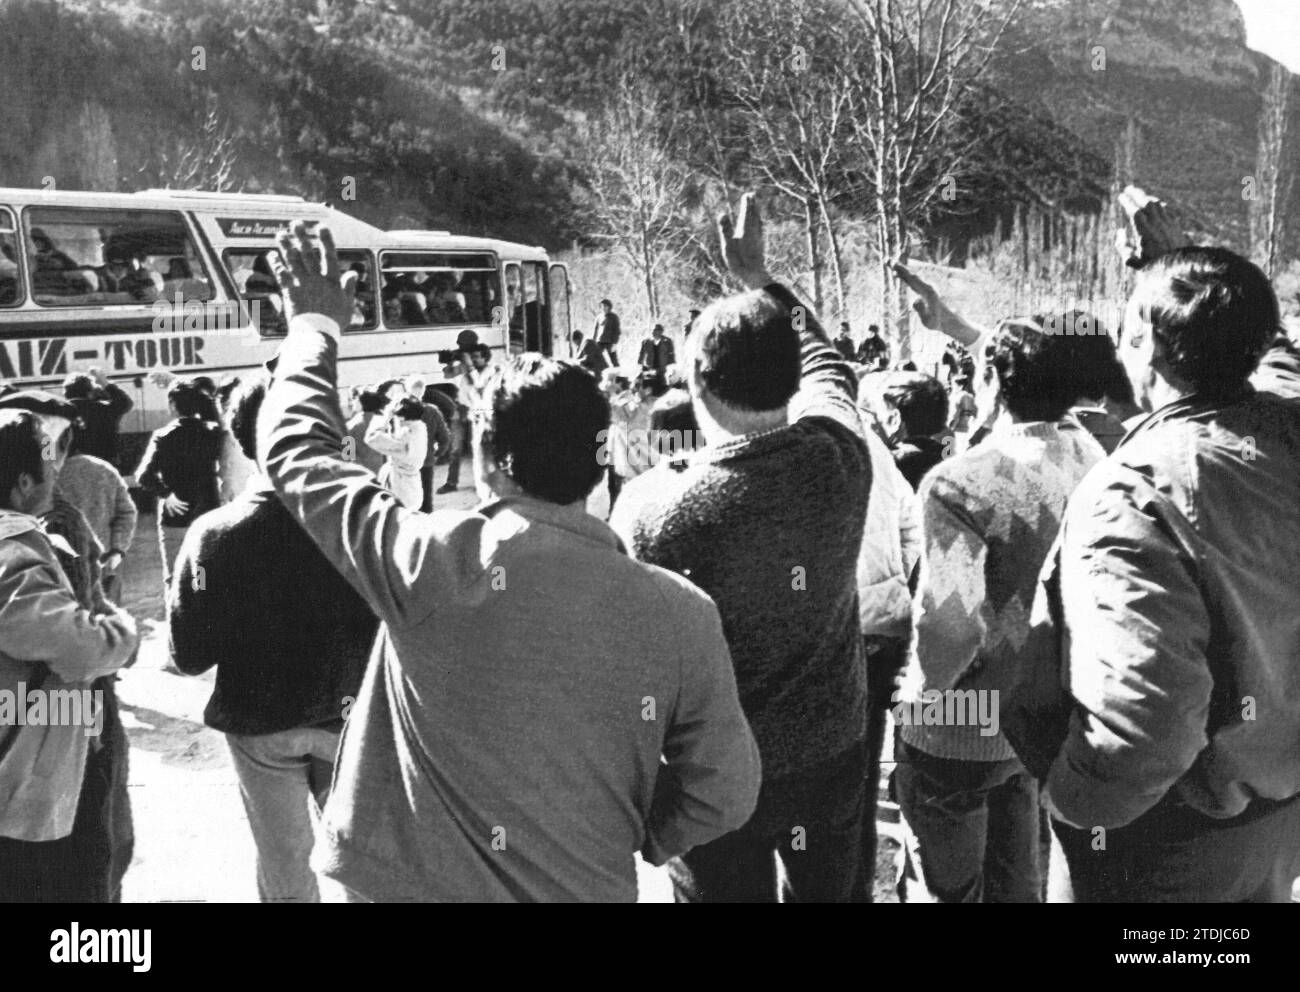 Plan (Huesca), 3/10/1985. The famous bachelors of Plan say goodbye to the women who responded to the request for women who wanted to get married, known as the 'Women's Caravan'. Credit: Album / Archivo ABC / Fabián Simón Stock Photo